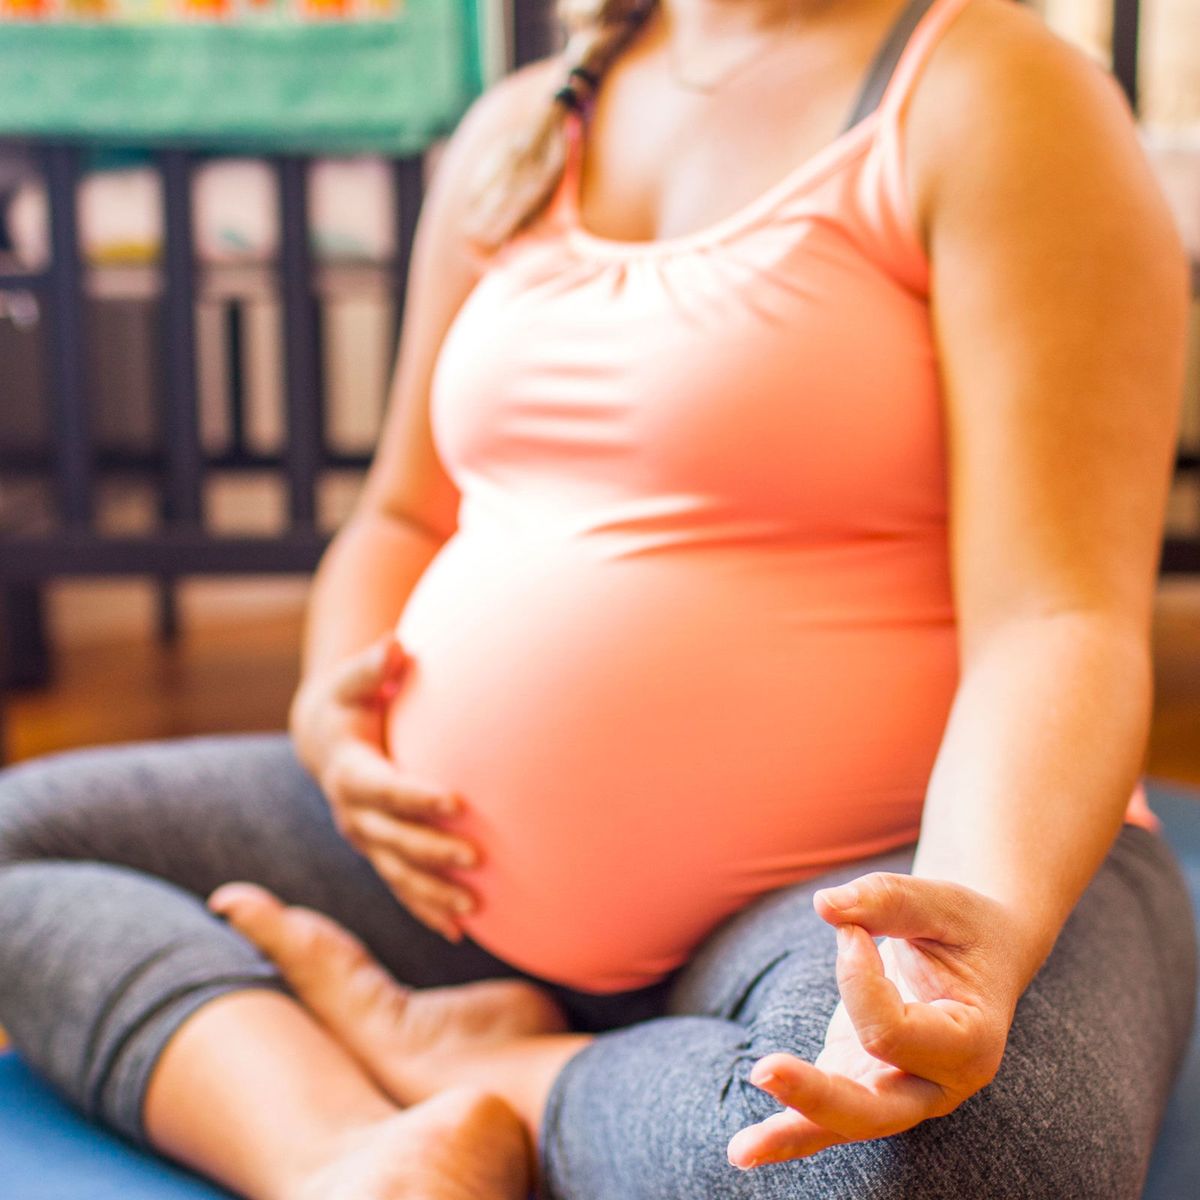 11 things I learned from pregnancy yoga